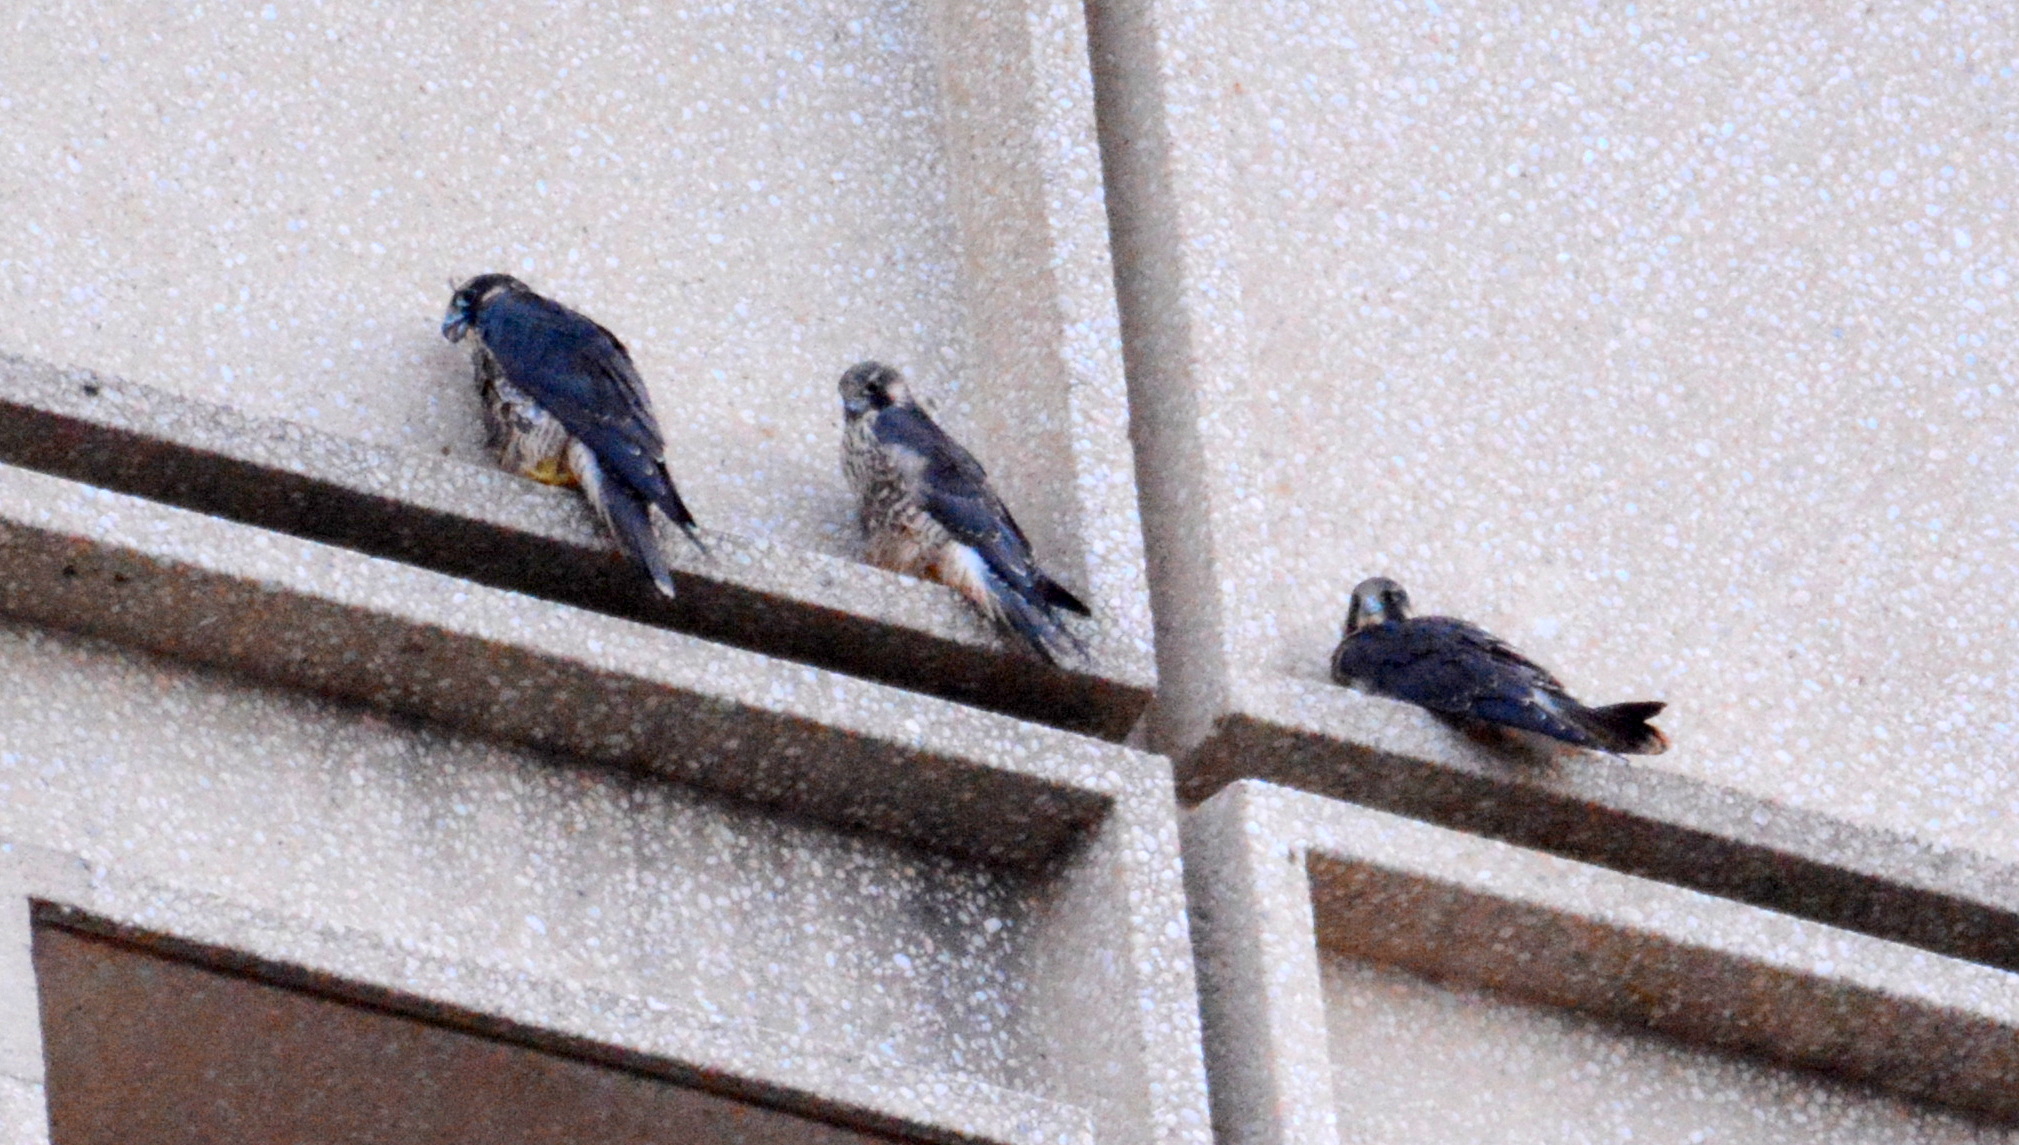 Arriving at their perches on the State Office building for the night